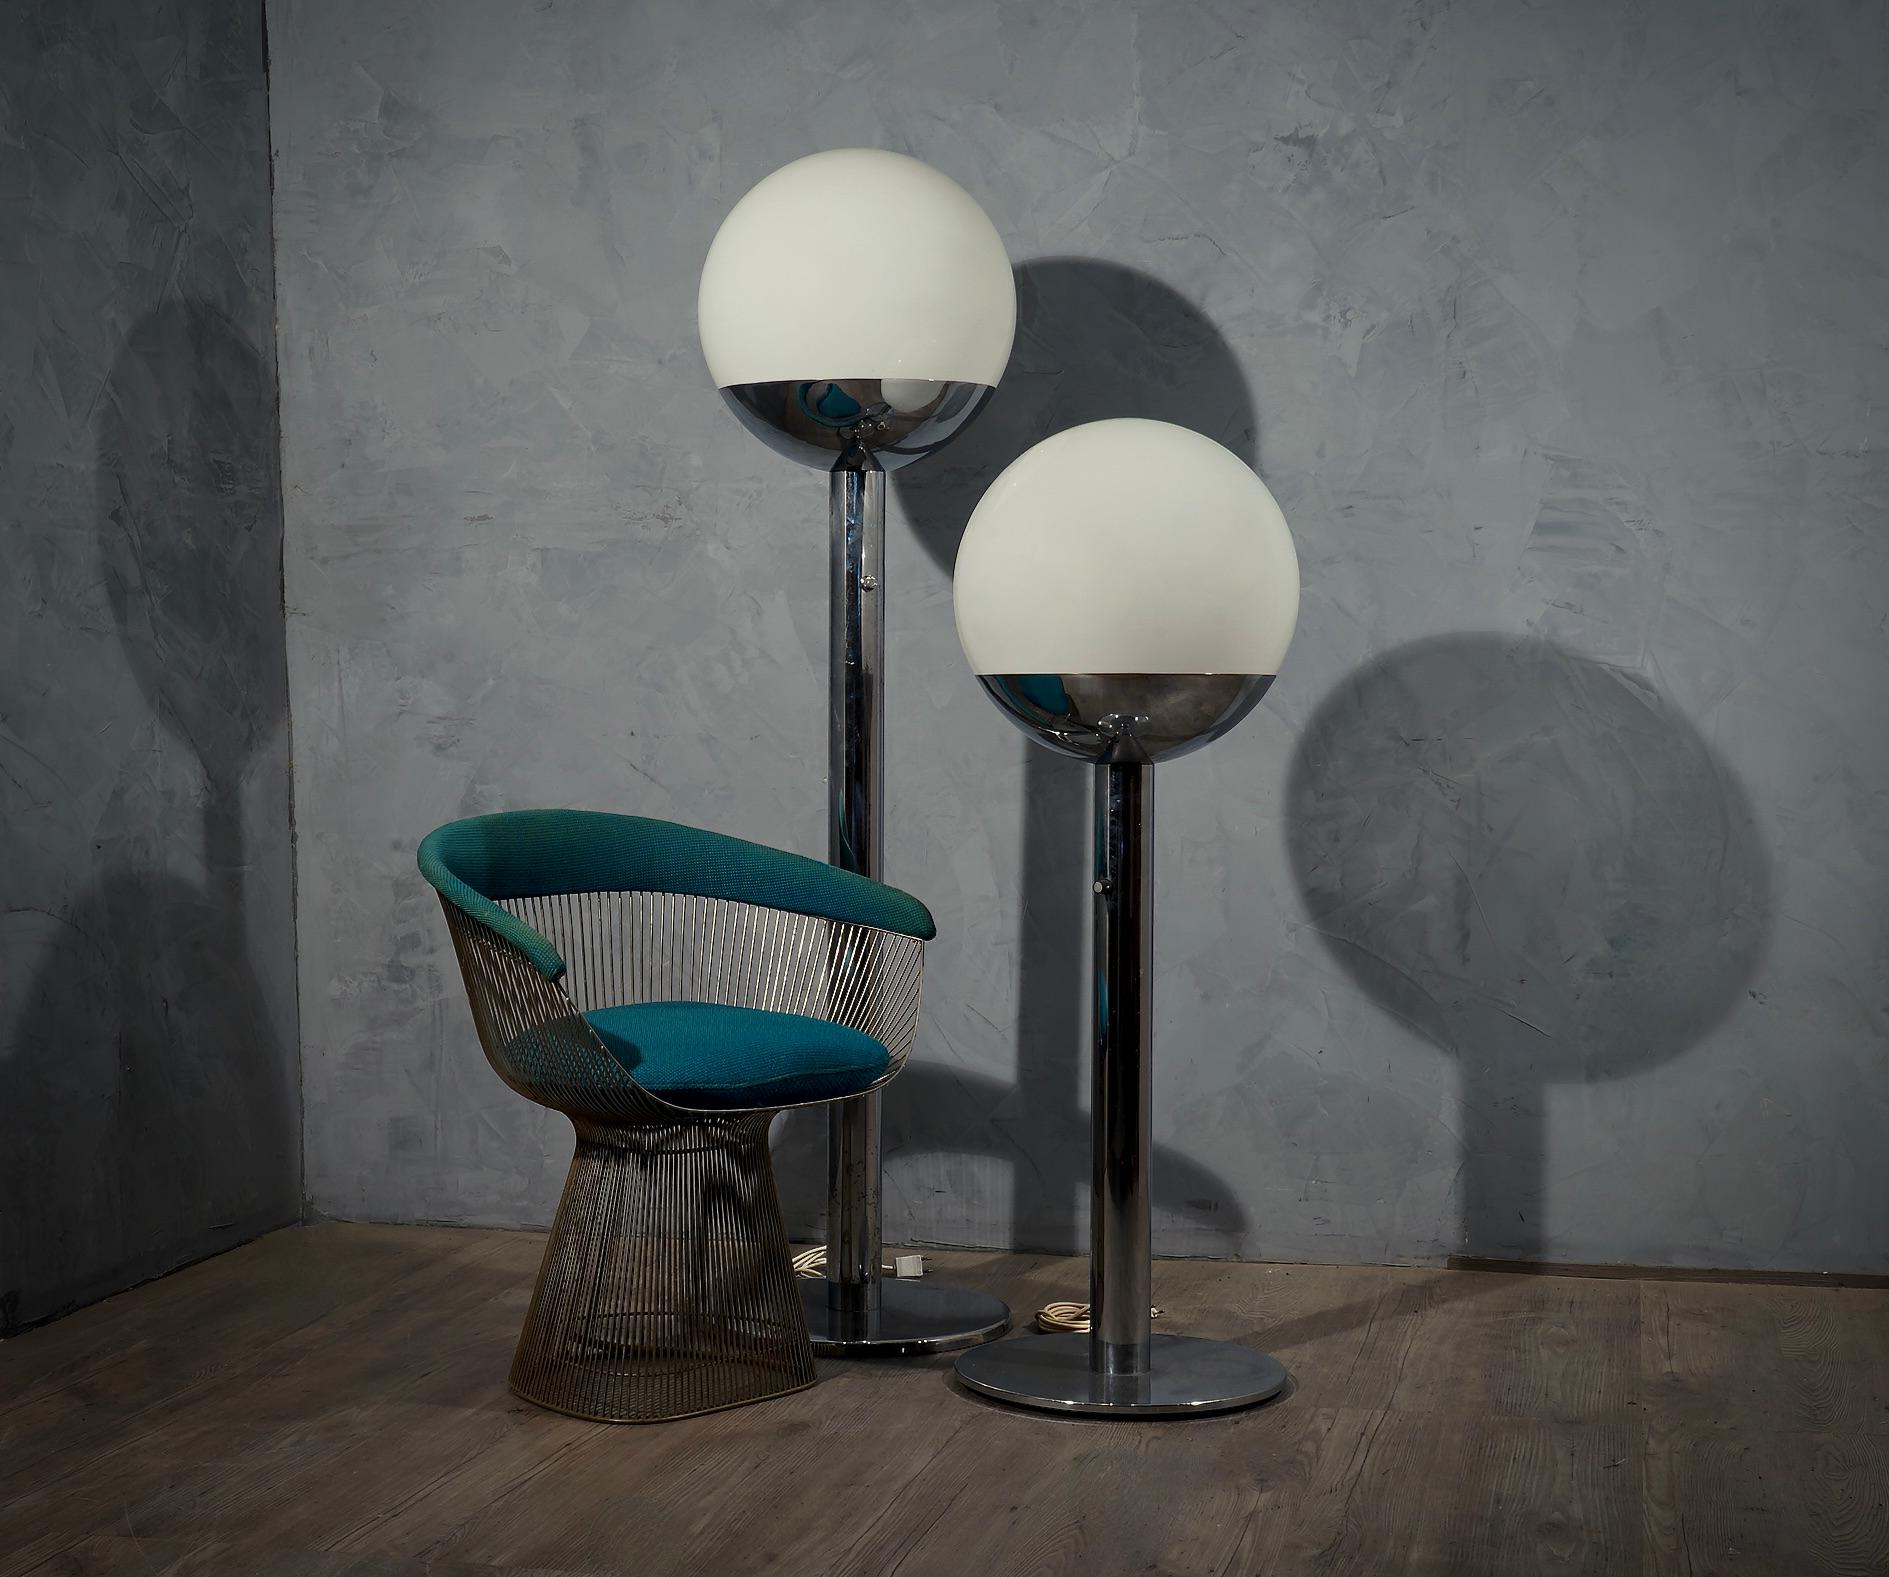 Very particular floor lamp by the designer Pia Crippa Guidetti, rigor and style imbue this 70s floor lamp.

The lamp is composed of a large central stem in chromed steel that starts from a large plate as a base. Above to accommodate the large white